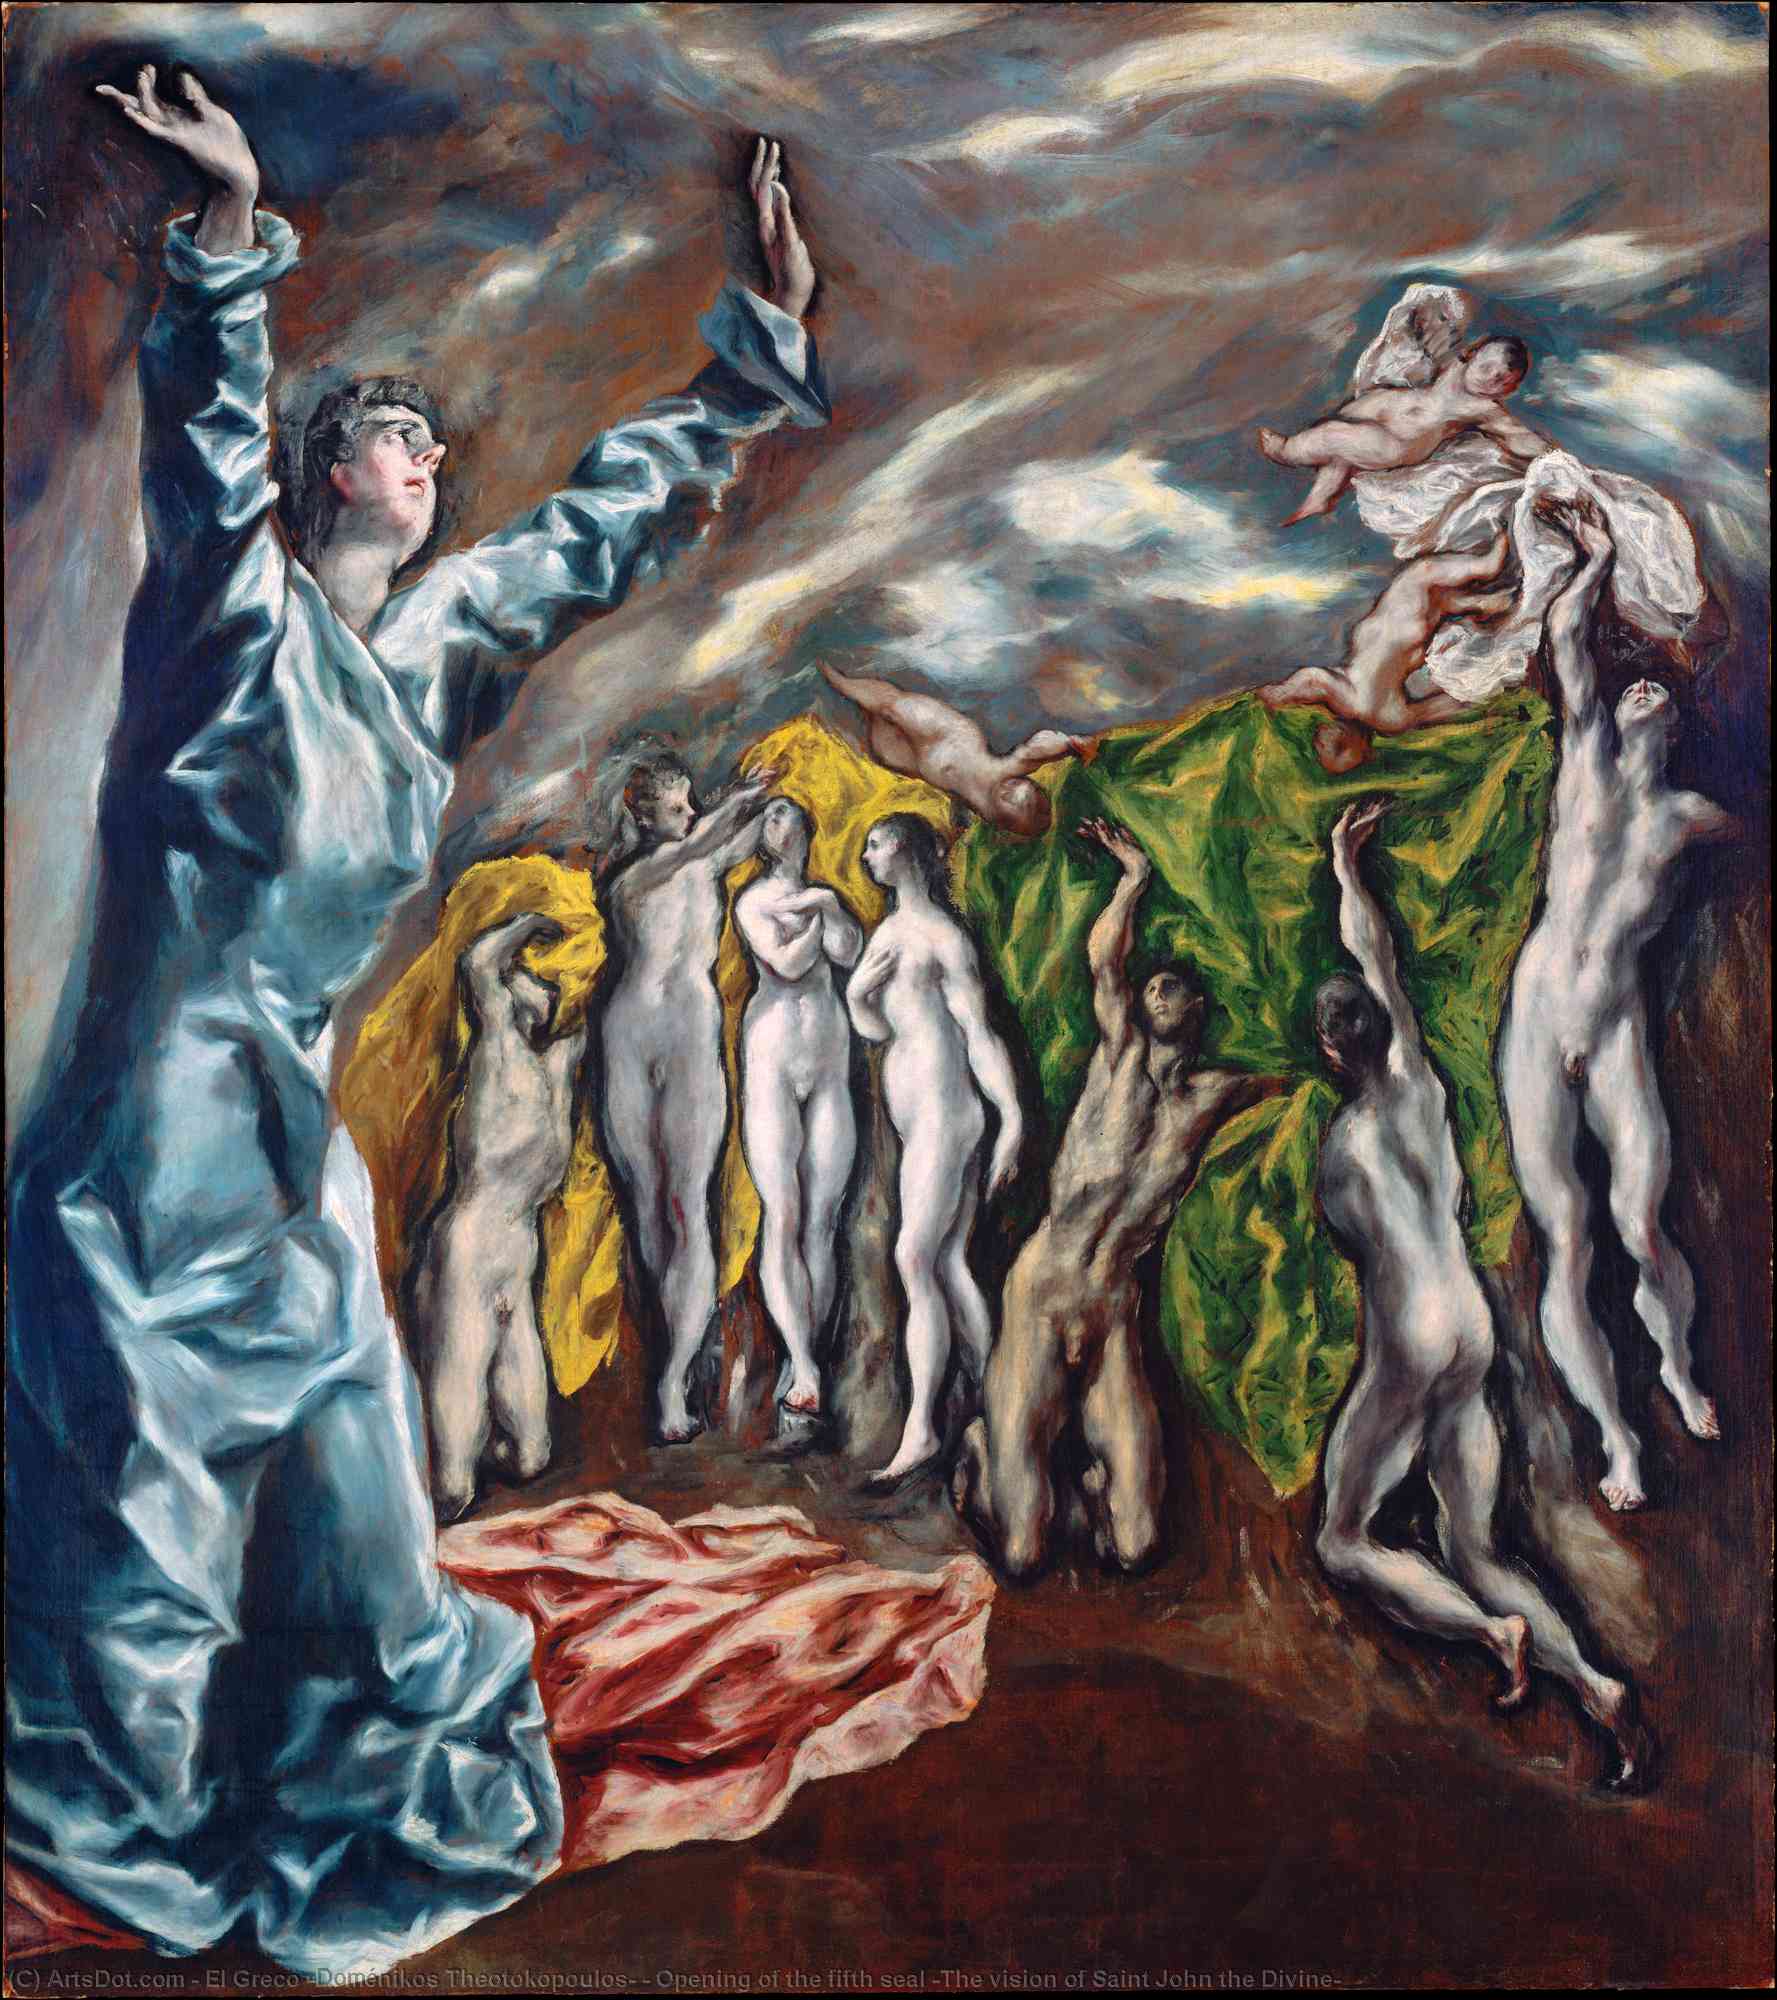 WikiOO.org - Encyclopedia of Fine Arts - Lukisan, Artwork El Greco (Doménikos Theotokopoulos) - Opening of the fifth seal (The vision of Saint John the Divine)